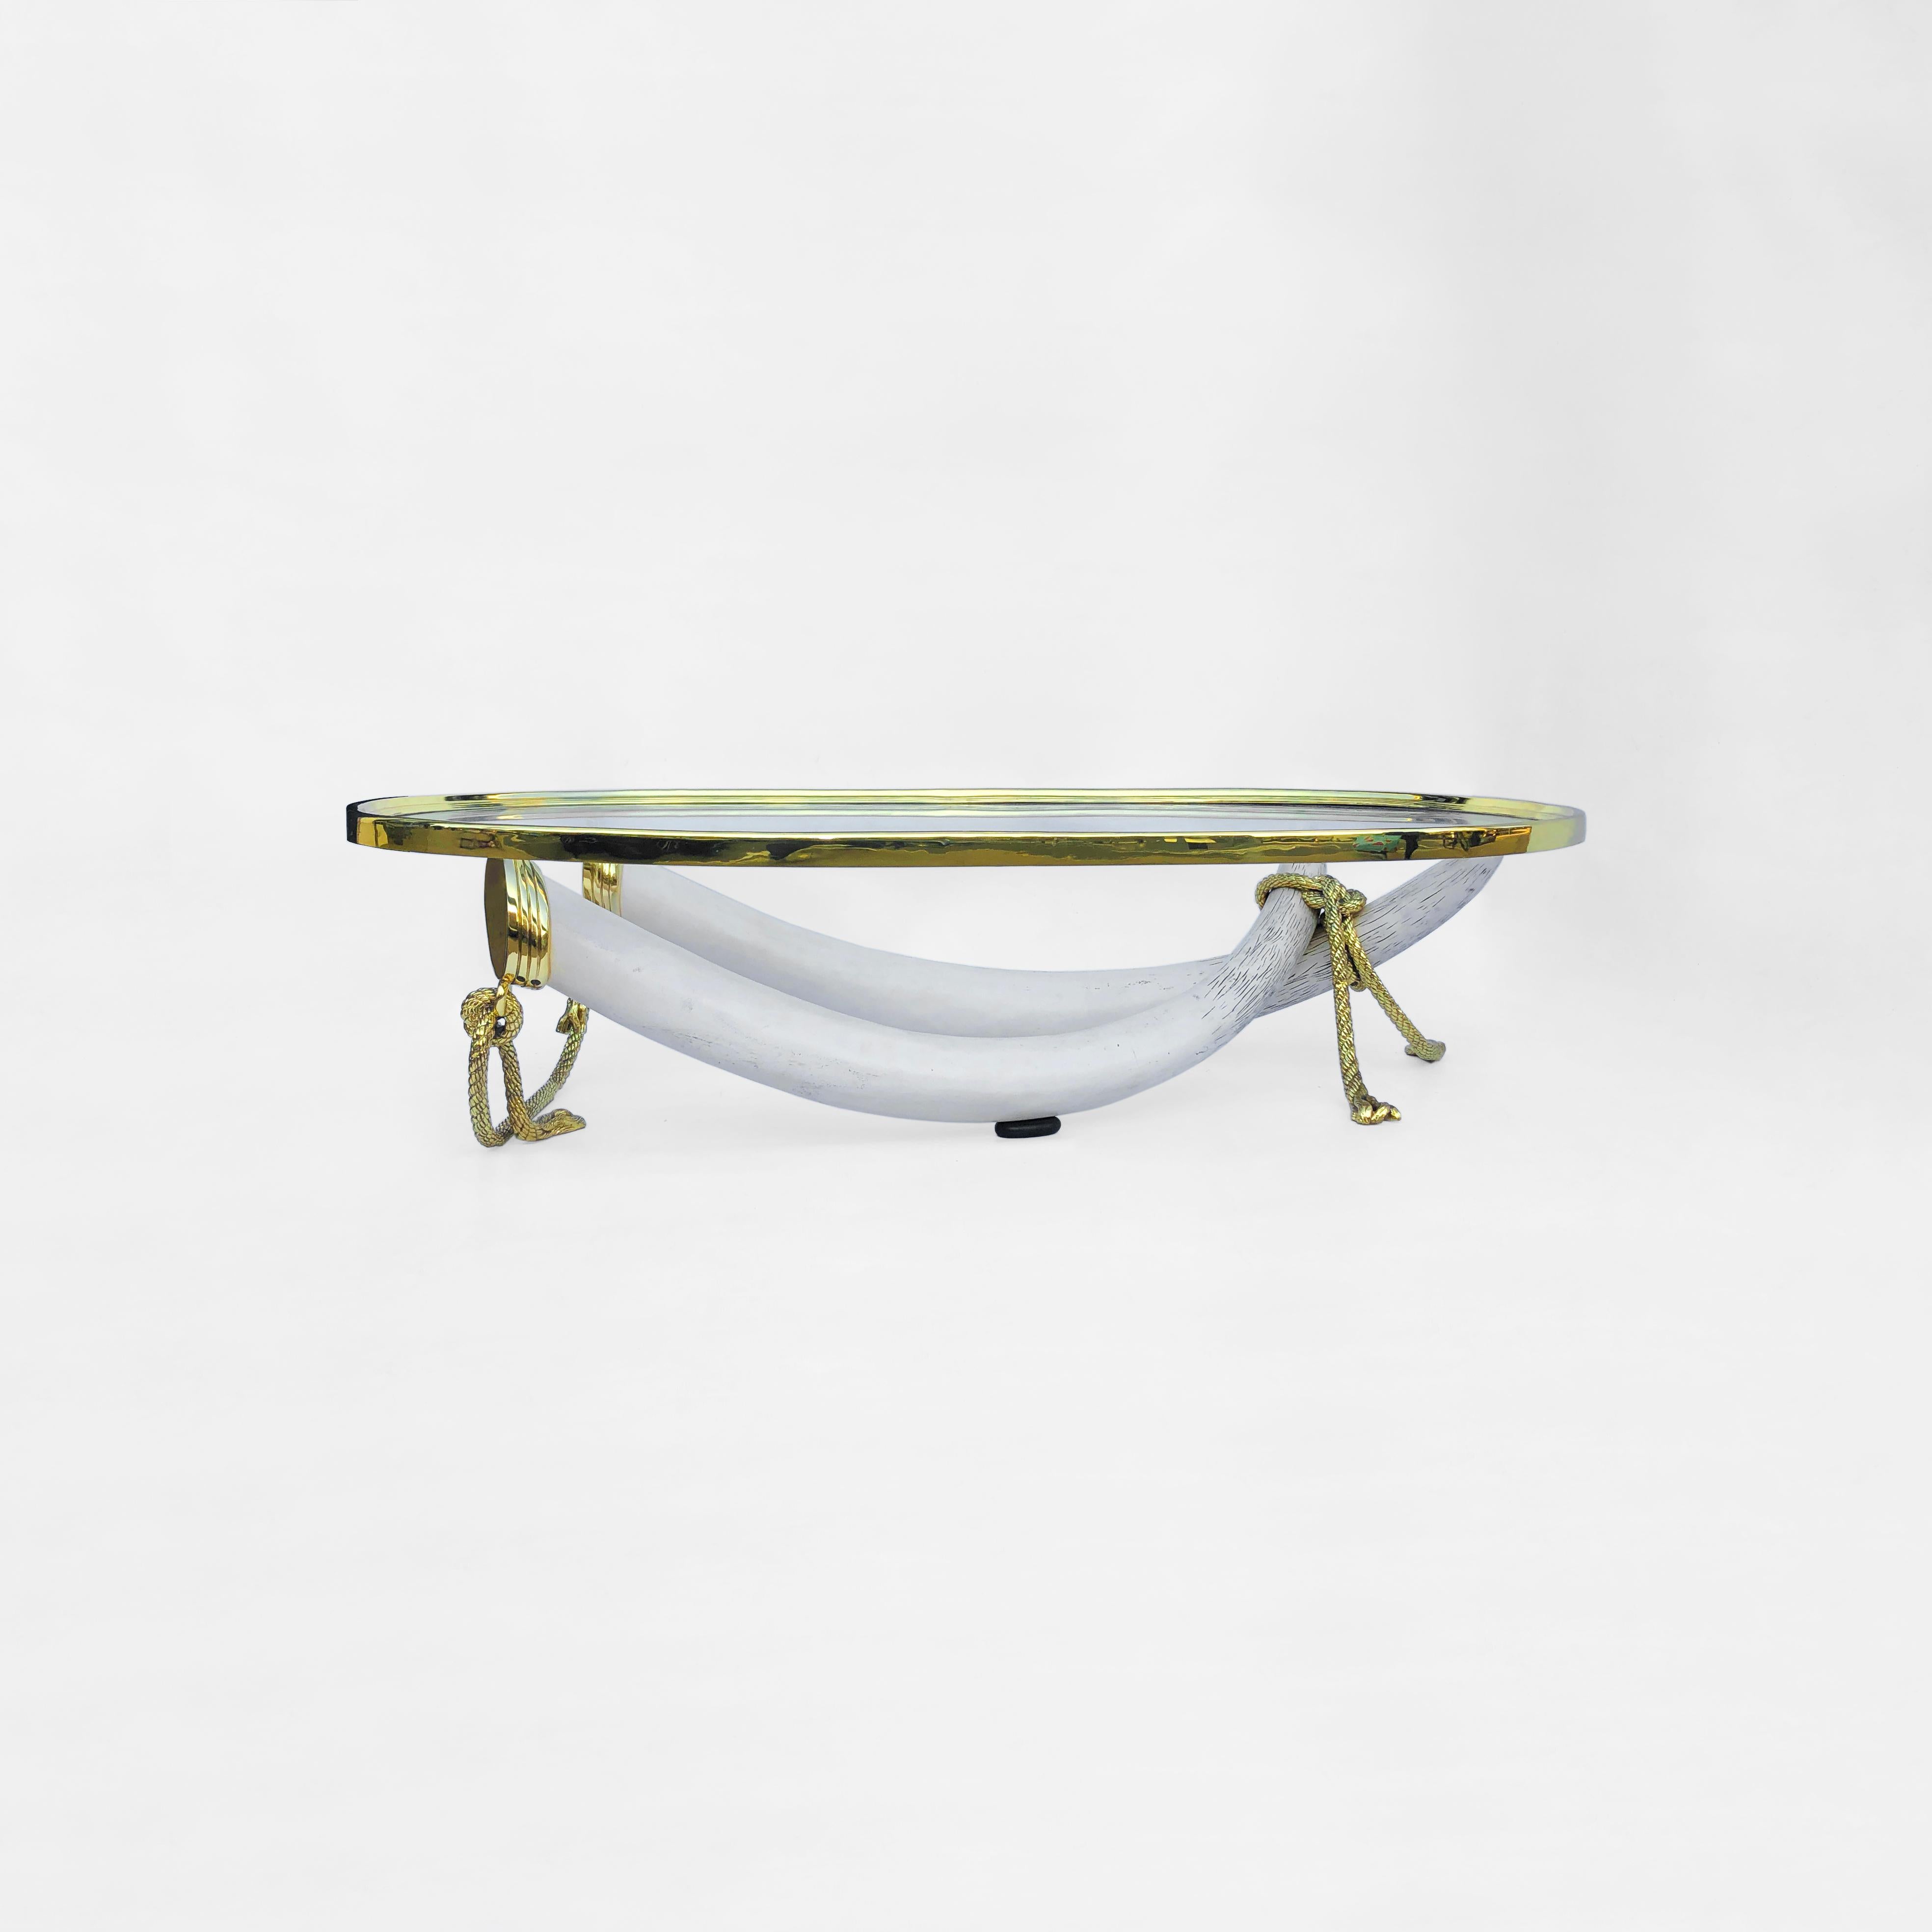 One of the most impressive pieces we've seen in a long time, this massive coffee table from Spanish designers Valenti consists of two crossed faux-ivory tusks supporting a large oval-shaped brass and glass top. The tusks are made of resin and